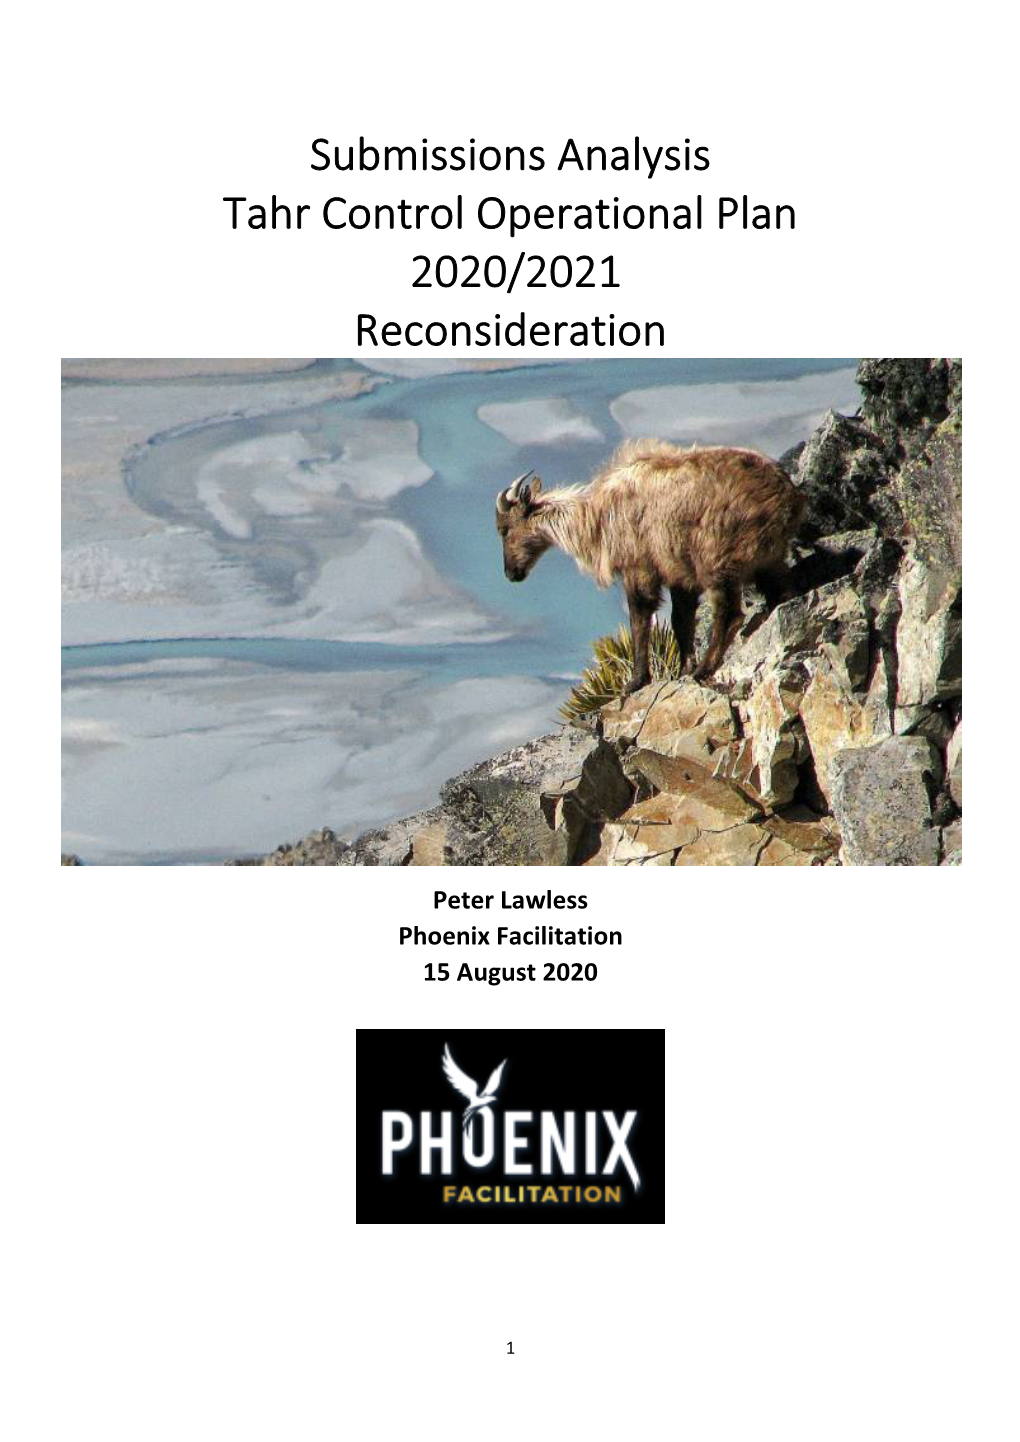 Submissions Analysis Tahr Control Operational Plan 2020/2021 Reconsideration